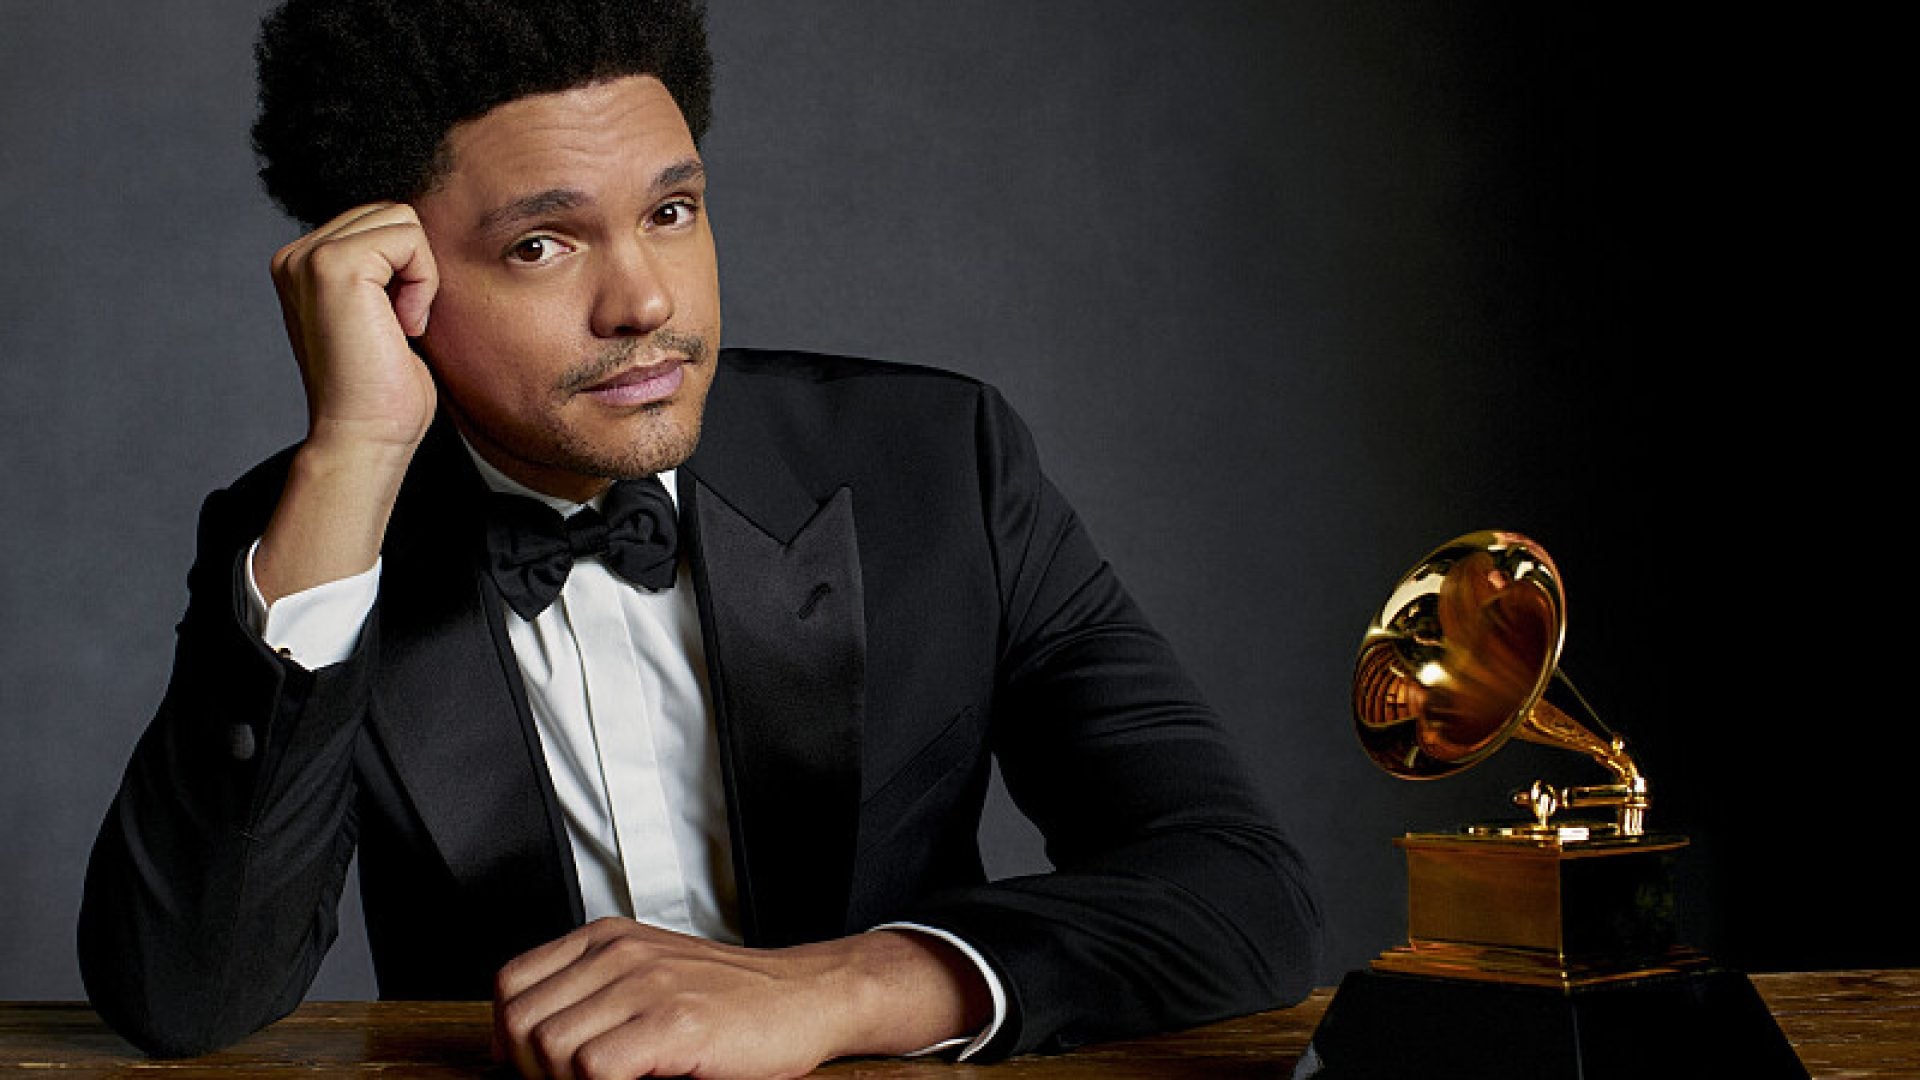 Trevor Noah On Hosting The Grammys For A Third Year In A Row: 'This Year's Going To Be A Huge Celebration'